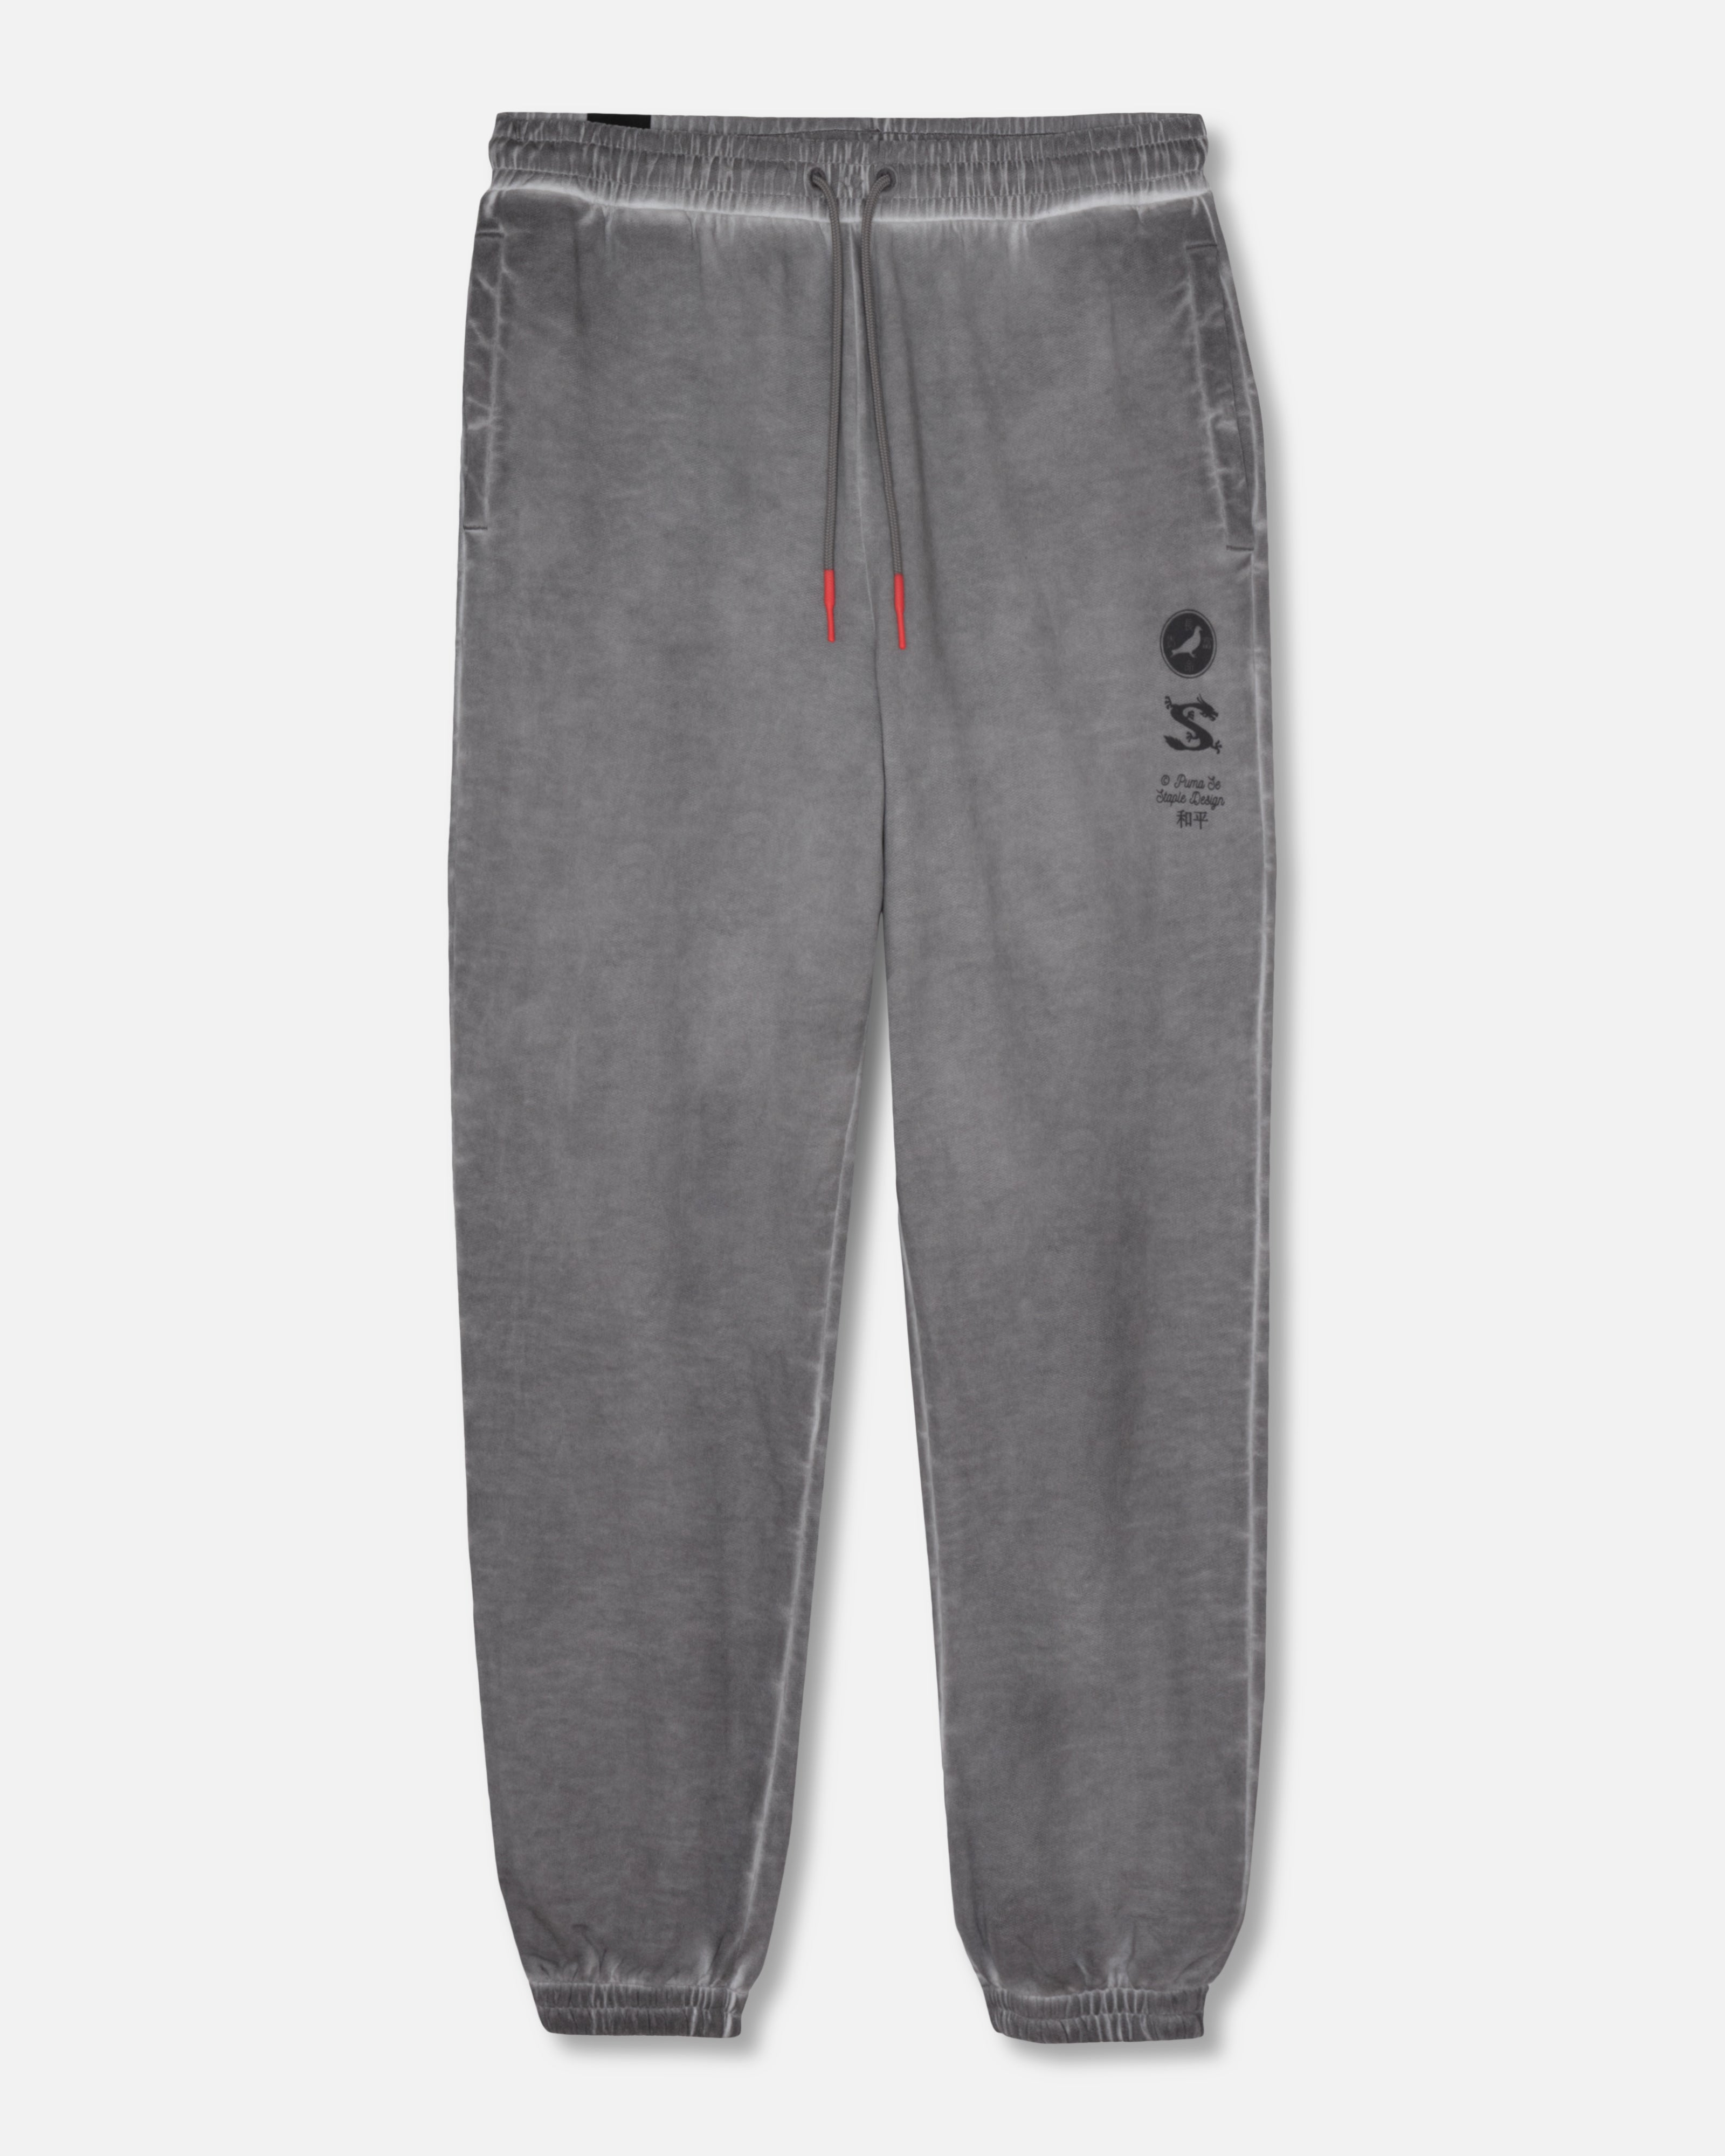 Puma x Staple Washed Sweatpant “Year Of The Dragon” - Pants | Staple Pigeon